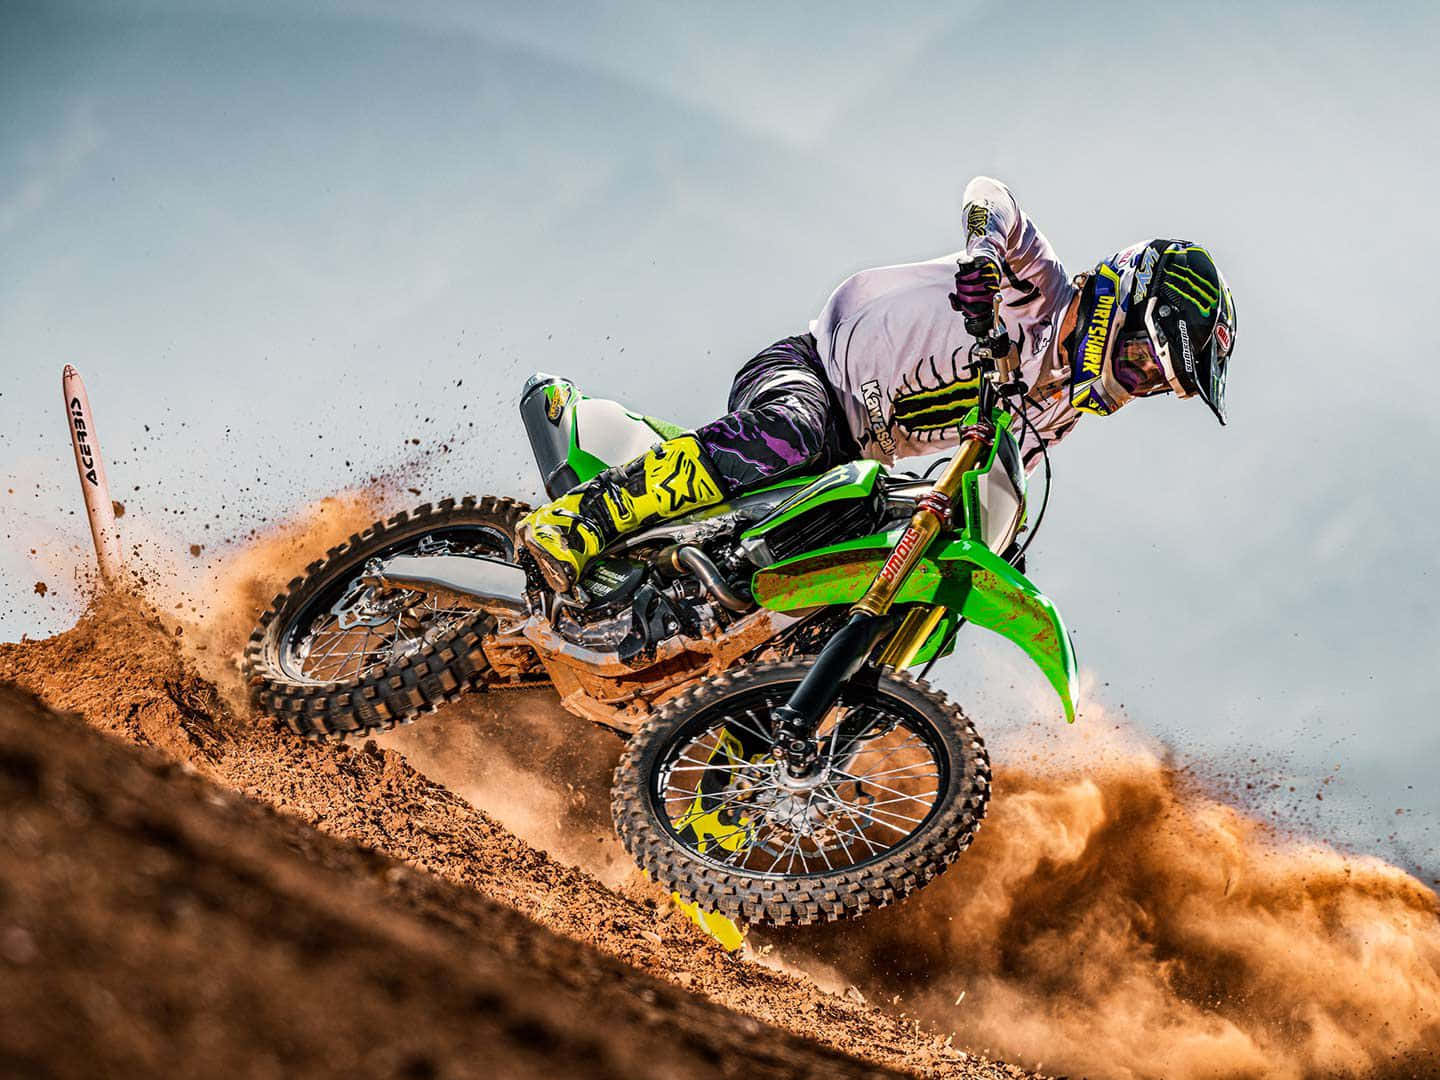 A Person Riding A Green Dirt Bike On A Dirt Track